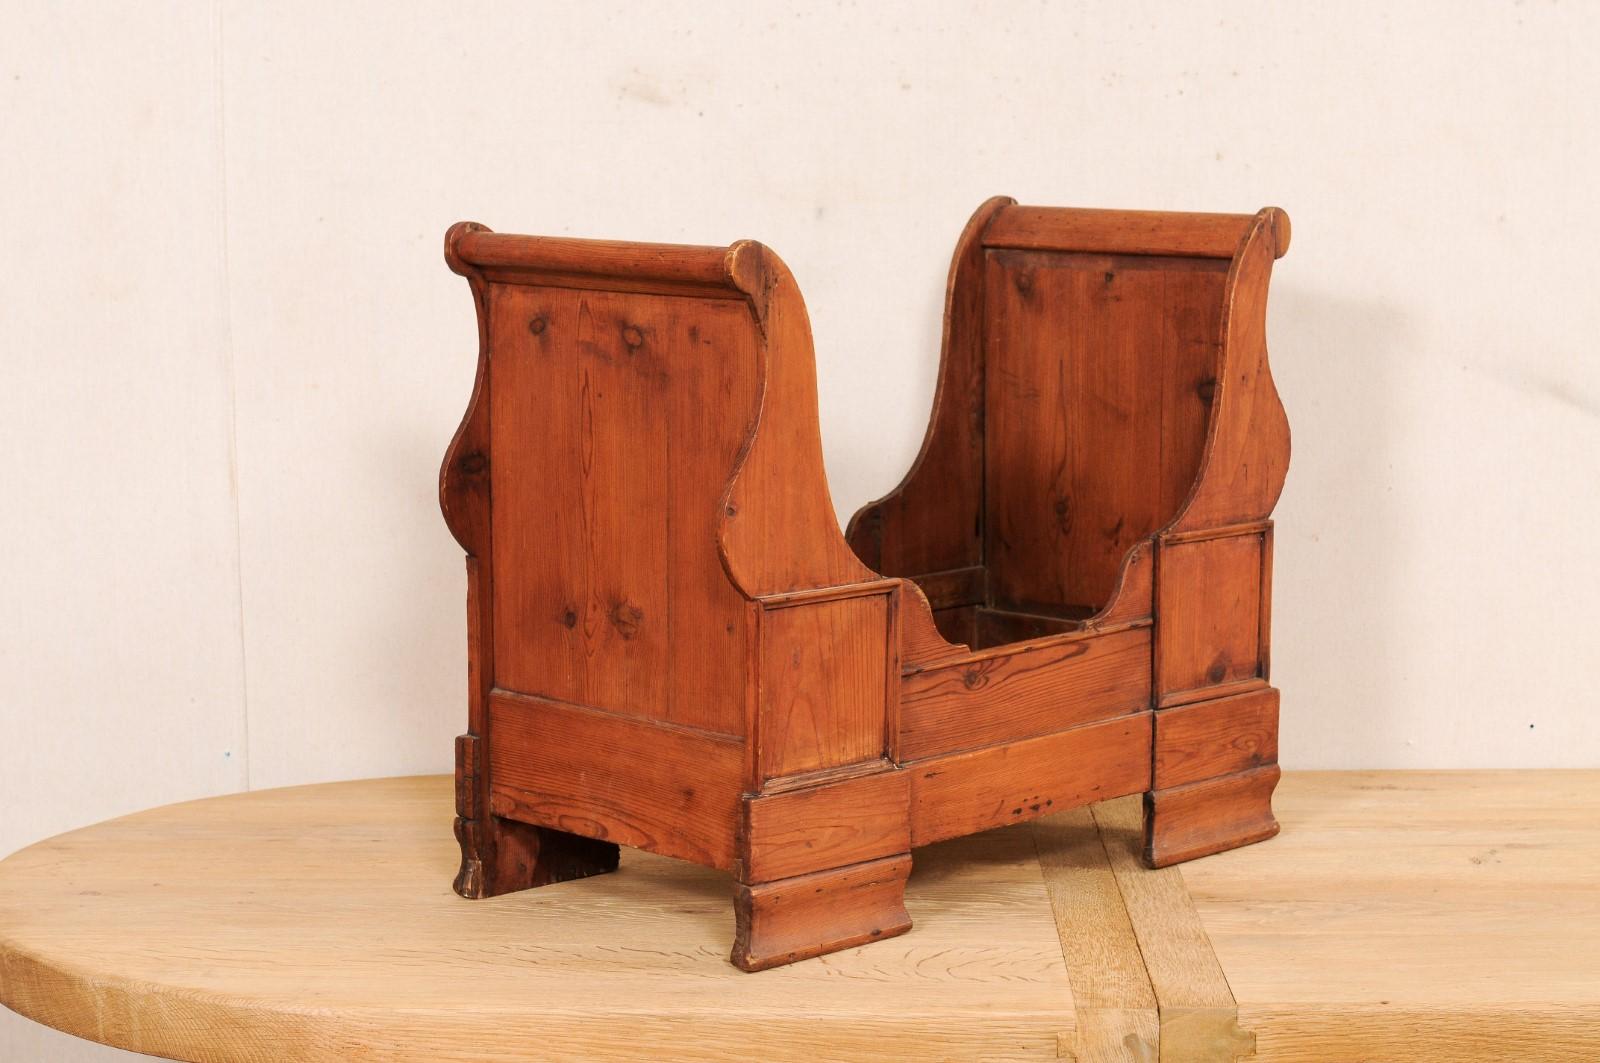 Antique Swedish Wood-Carved Sleigh Dog Bed (For the Pampered Pooch or Kitty!)  For Sale 5